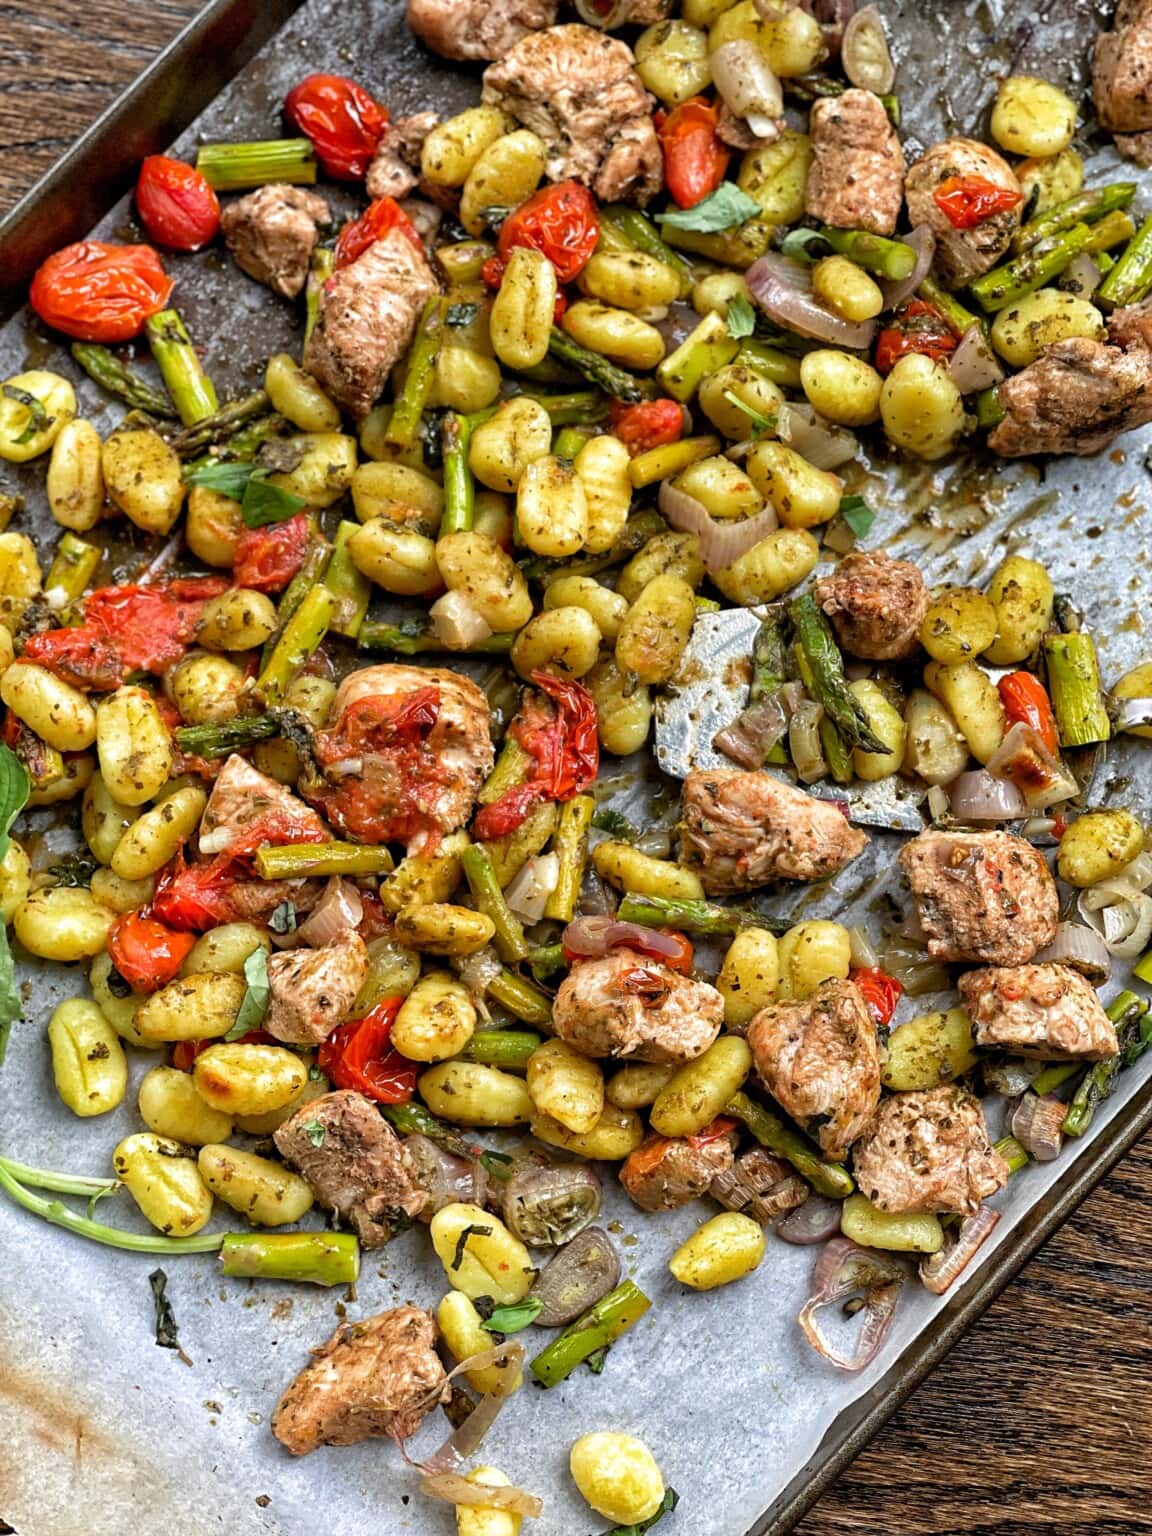 Healthy Sheet Pan Gnocchi, Chicken, and Vegetables